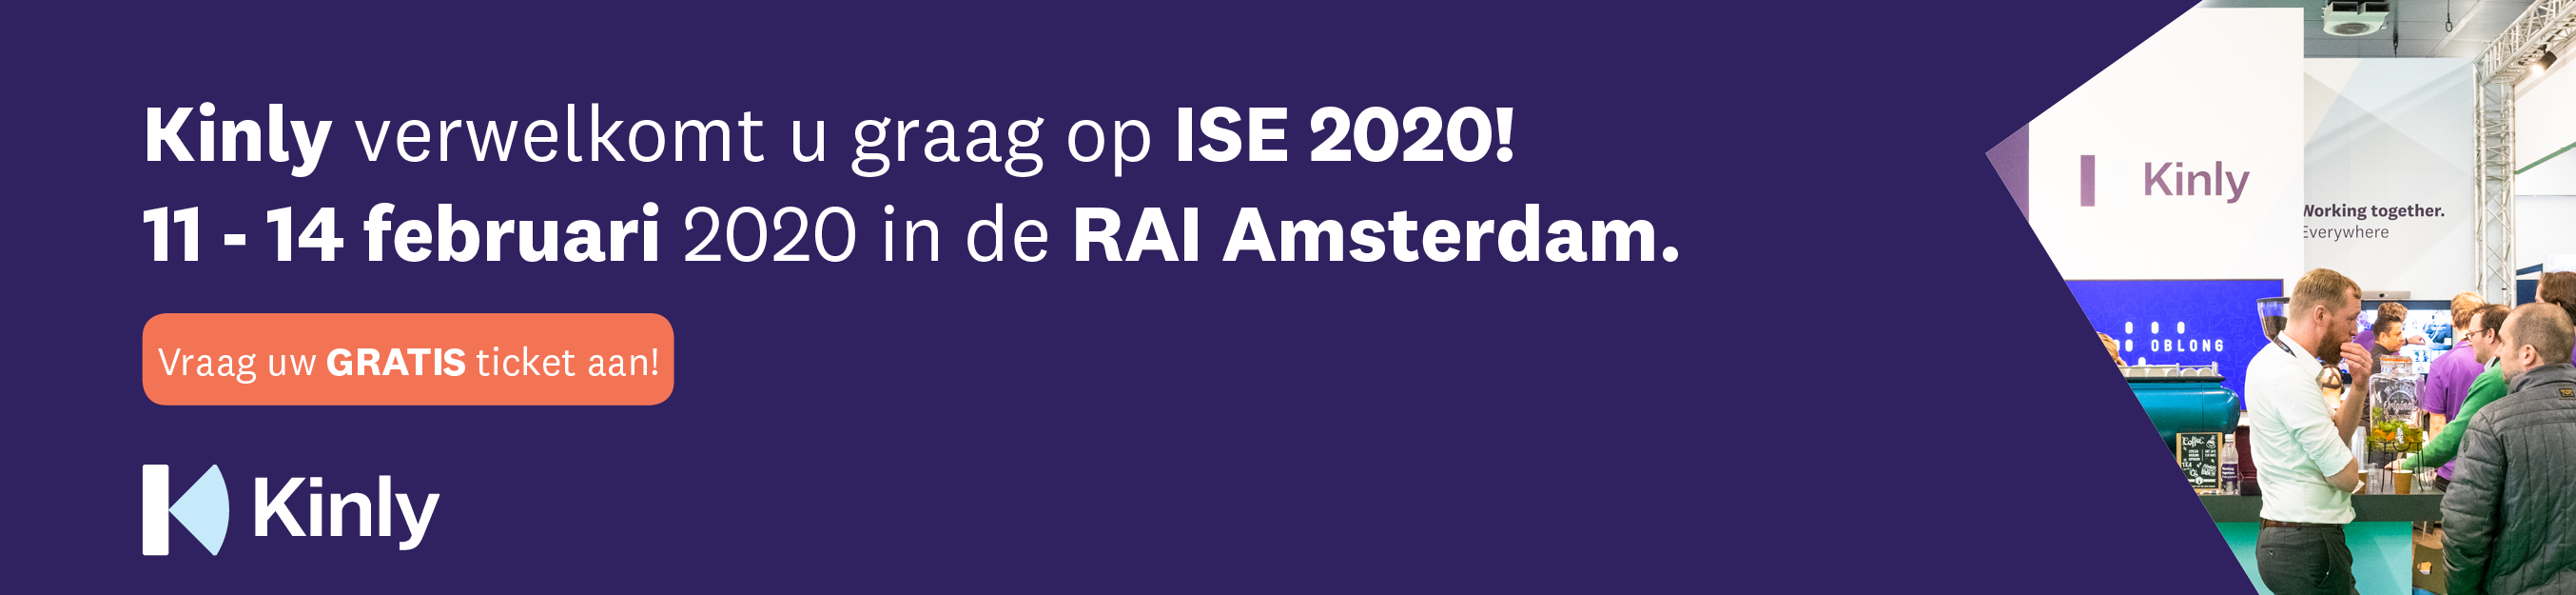 ISE Email banner 2020